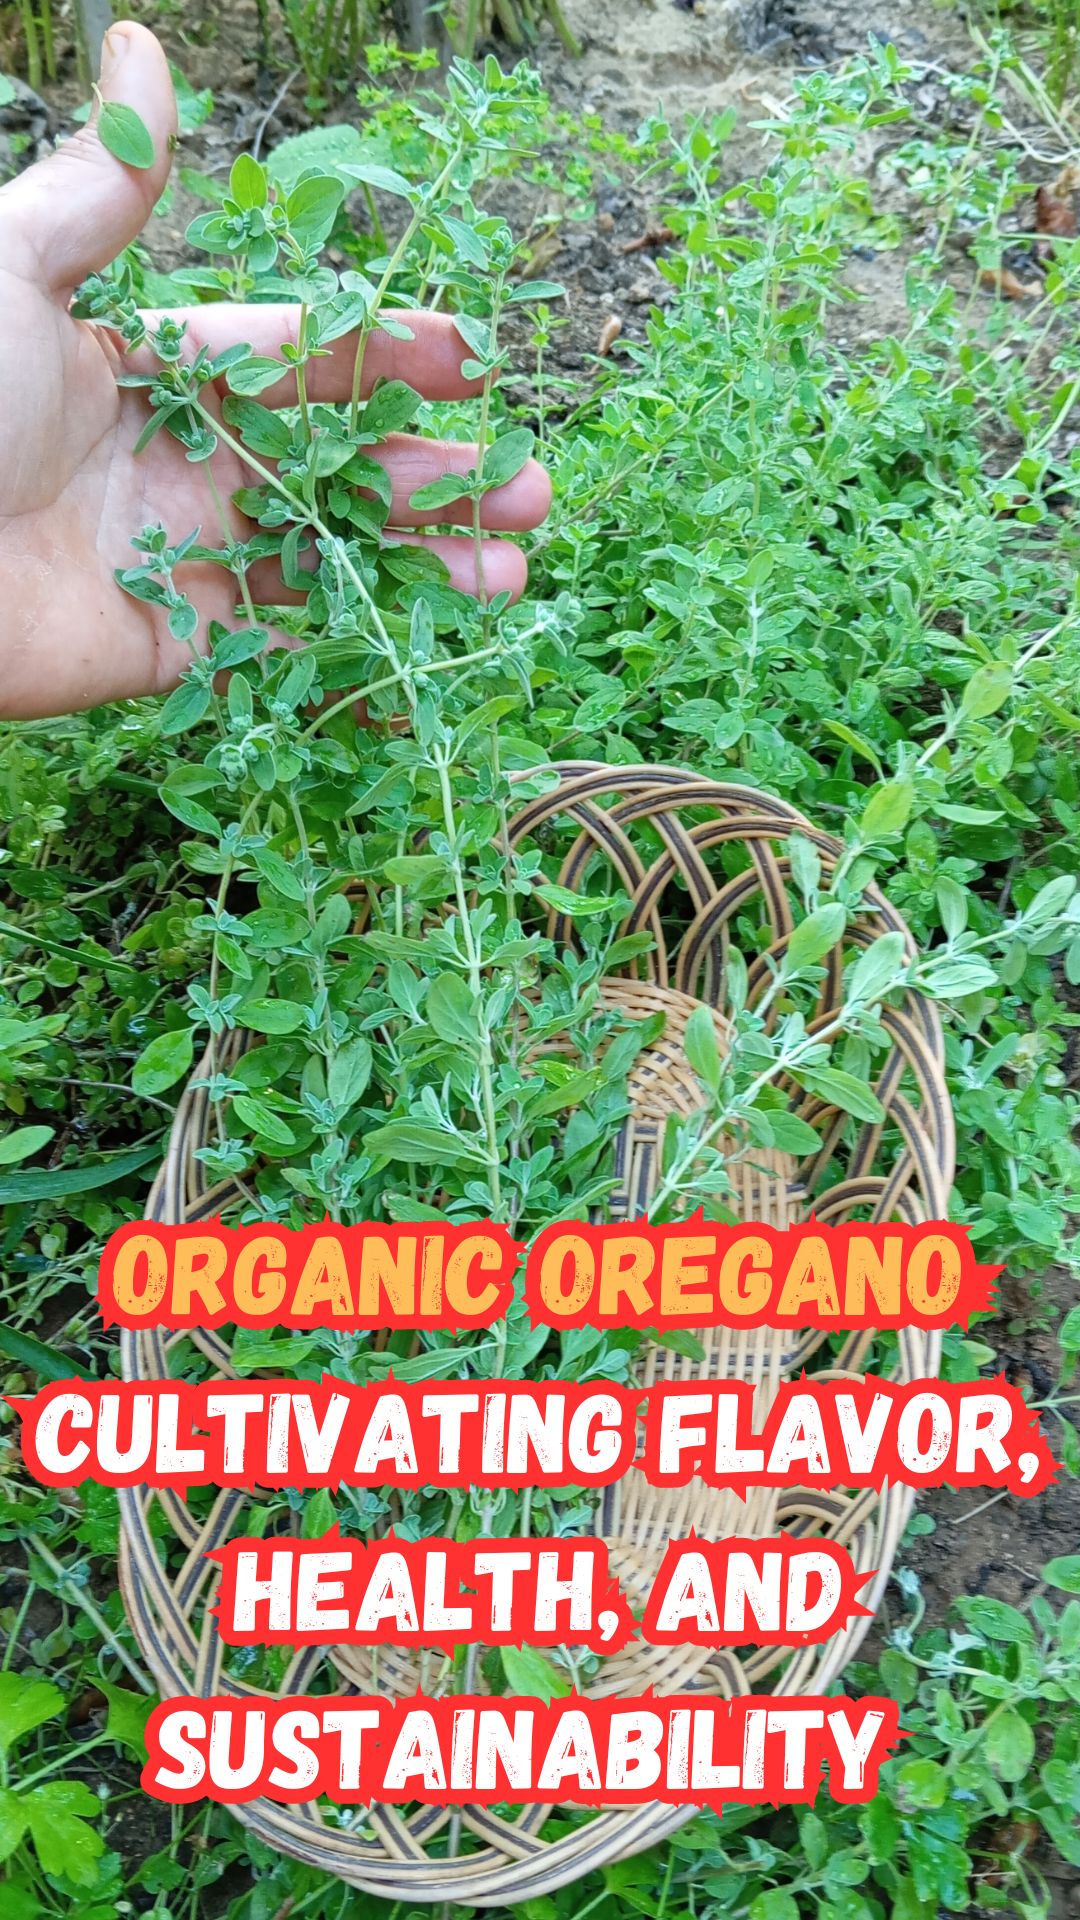 Oregano is a valuable and versatile aromatic herb that can be a great addition to any herb garden, no matter your level of gardening expertise. The existence of it in your garden gives a pleasant and tasty experience that is enjoyable for everyone. Oregano not only enhances the taste of your food with its aromatic flavor, but it also offers many health advantages. This feature makes it an excellent herb to keep available, as it has multiple uses.